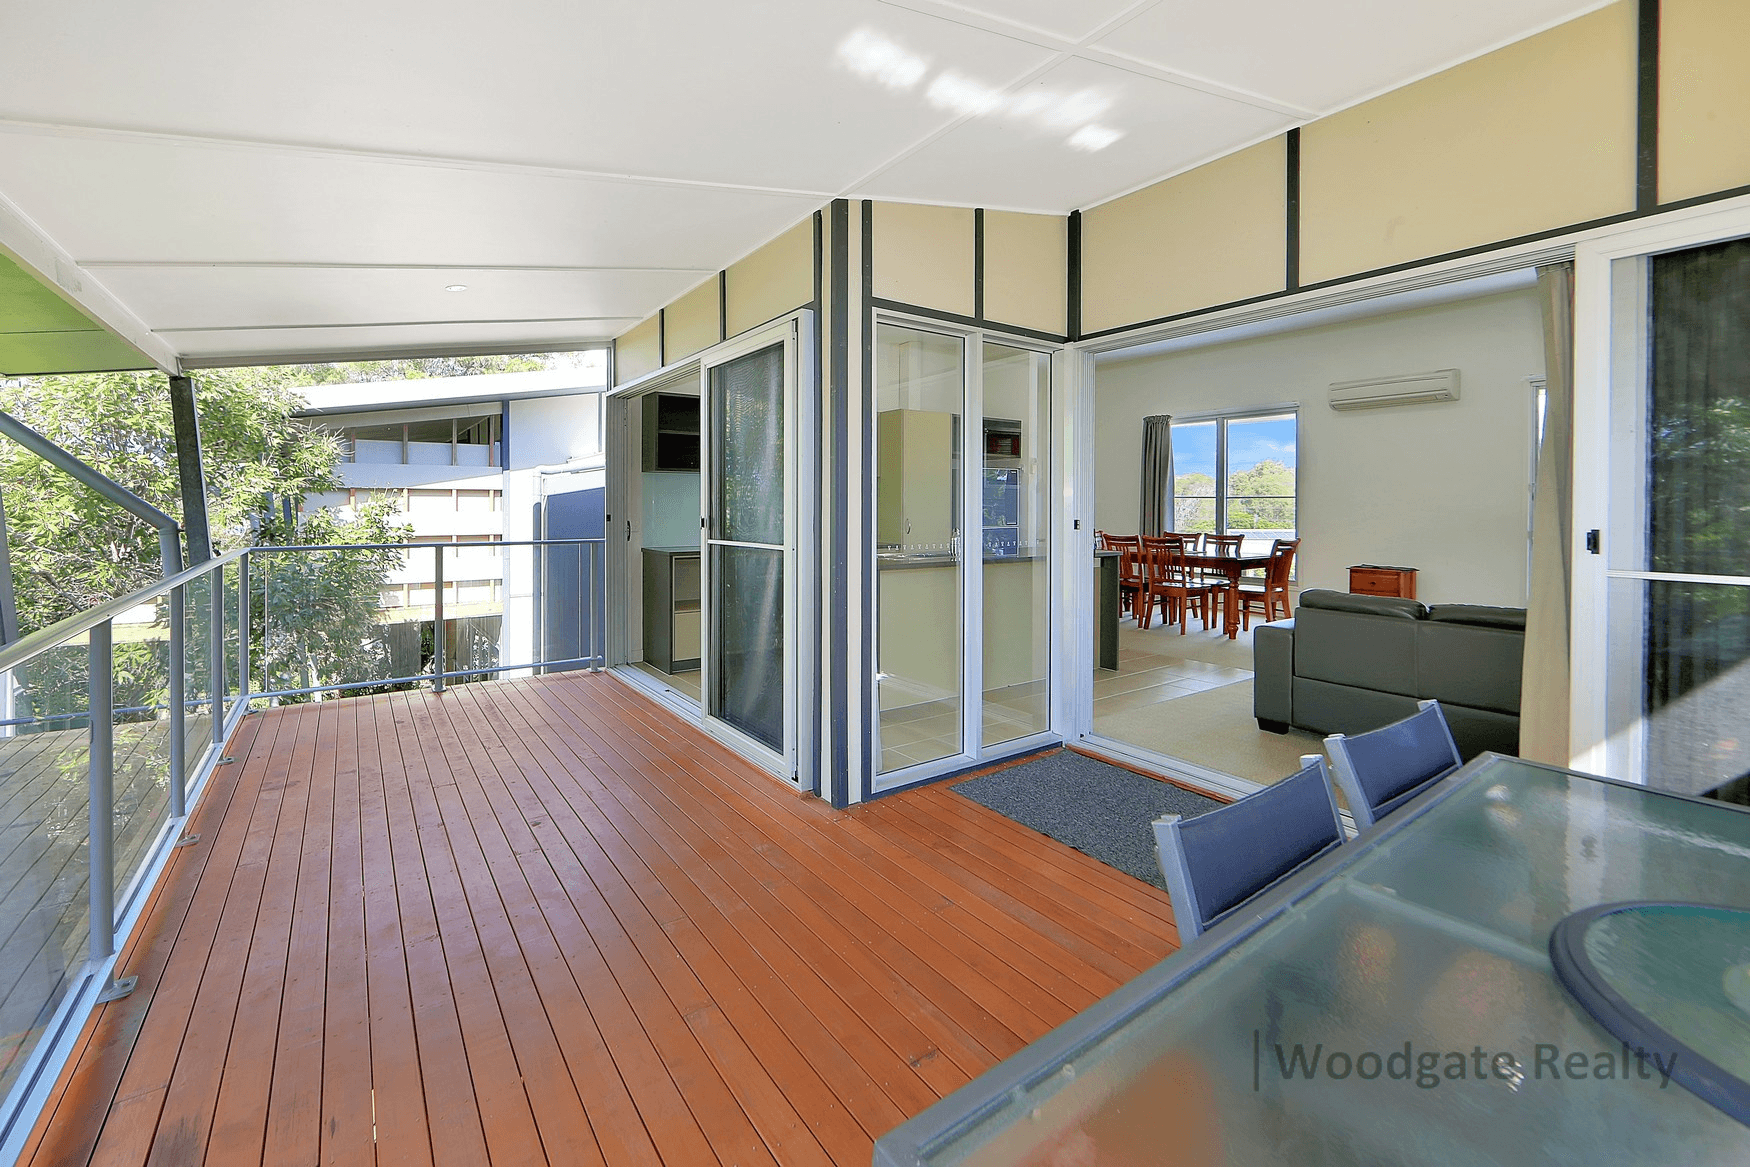 3/1 Hussar Court, Woodgate, QLD 4660